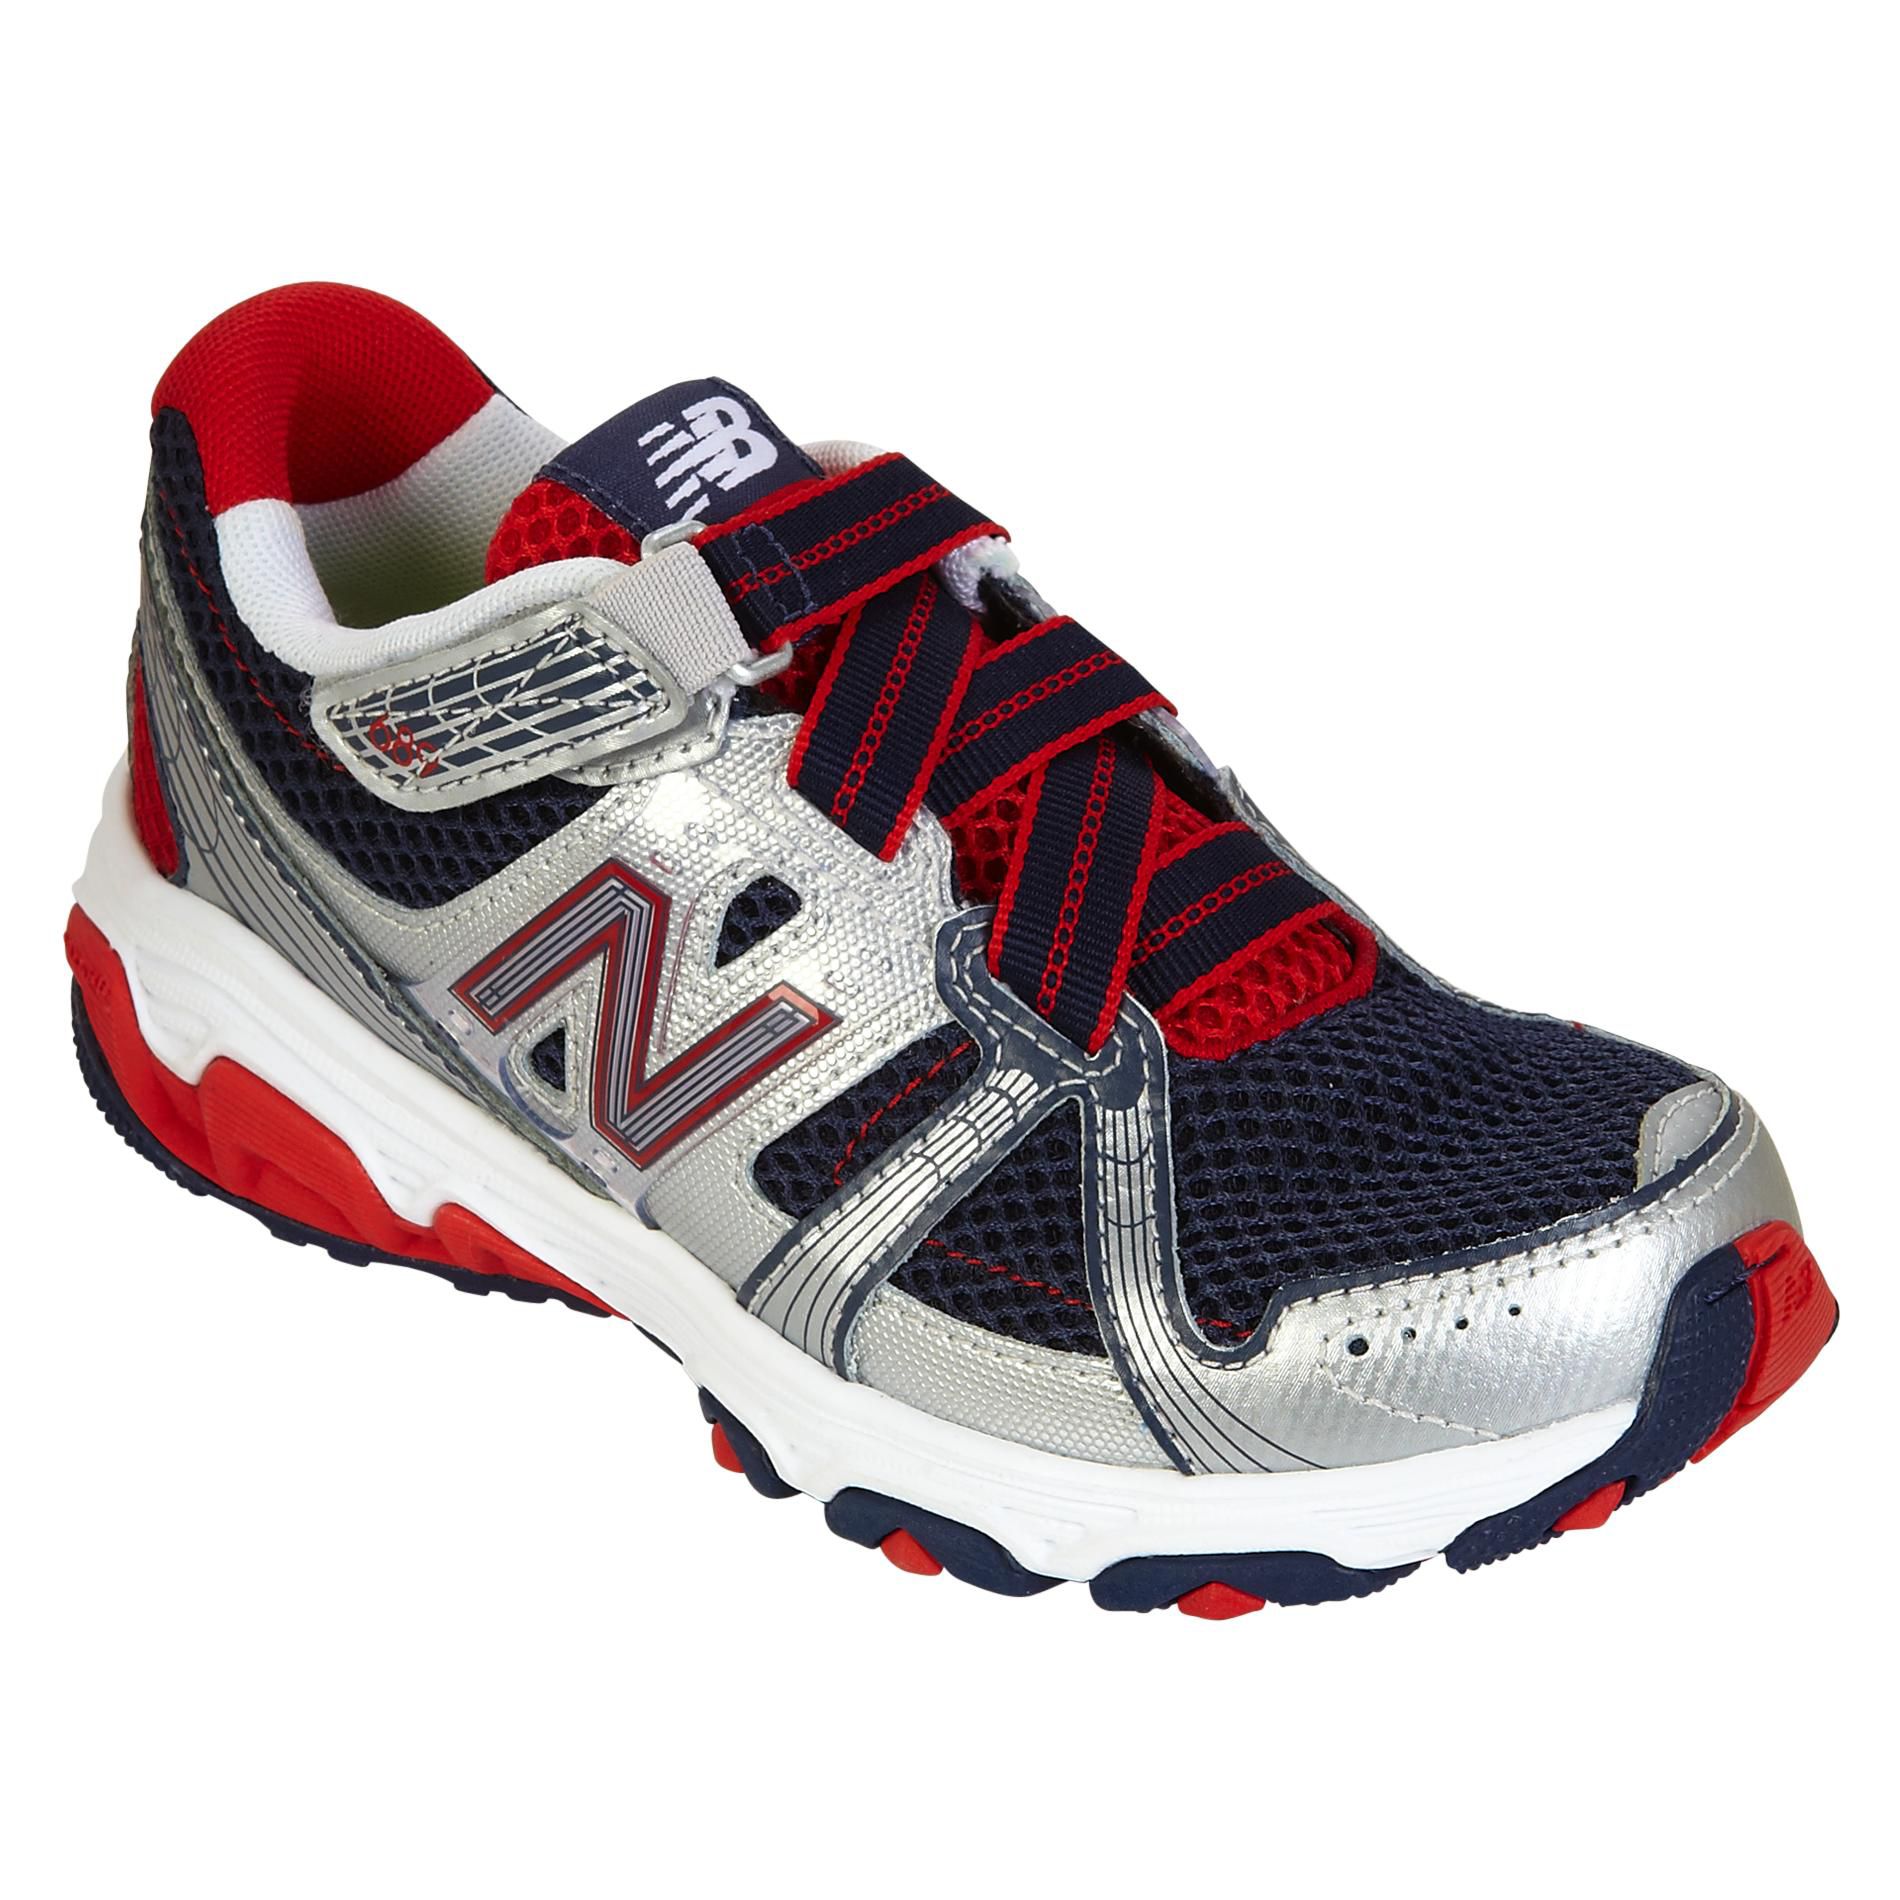 New Balance Boys 689 Wide Width Athletic Shoe - Navy/Red - Shoes - Baby ...